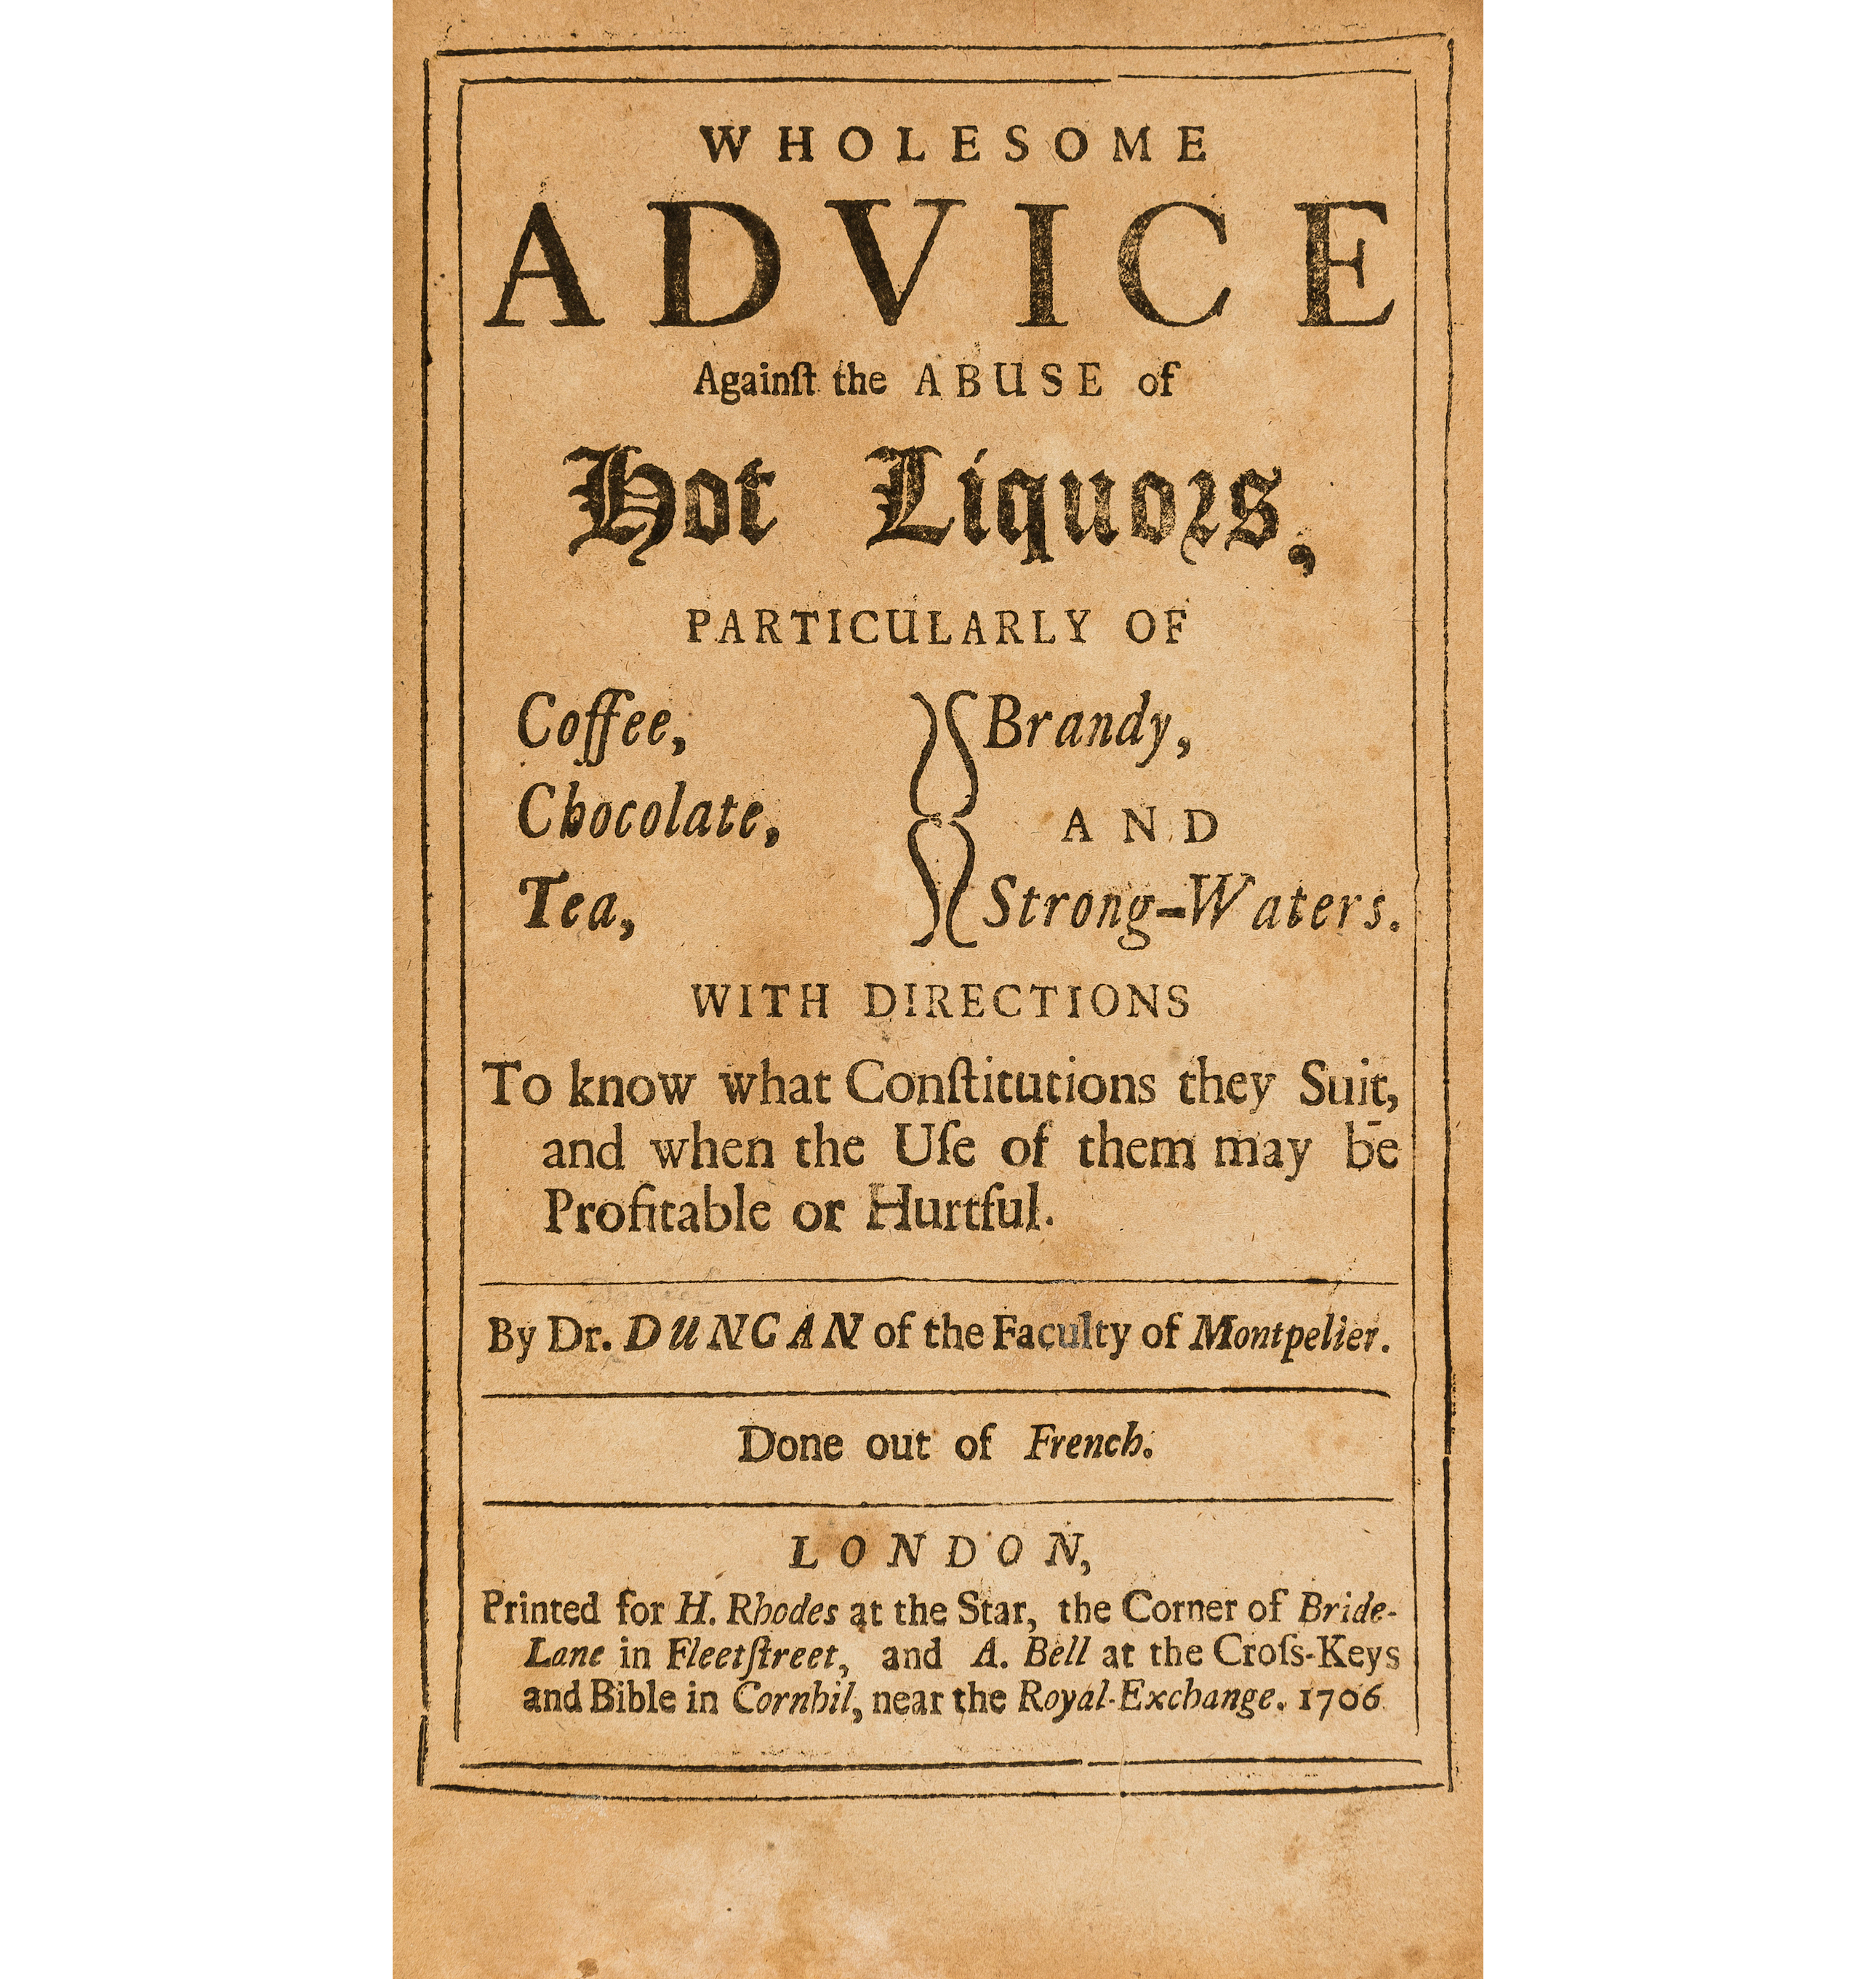 Dr. Daniel Duncan,‘ Wholesome Advice Against the Abuse of Hot Liquors, Particularly of Coffee, Chocolate, Tea, Brandy and Strong-Waters,’ English first edition, est. £600-£800